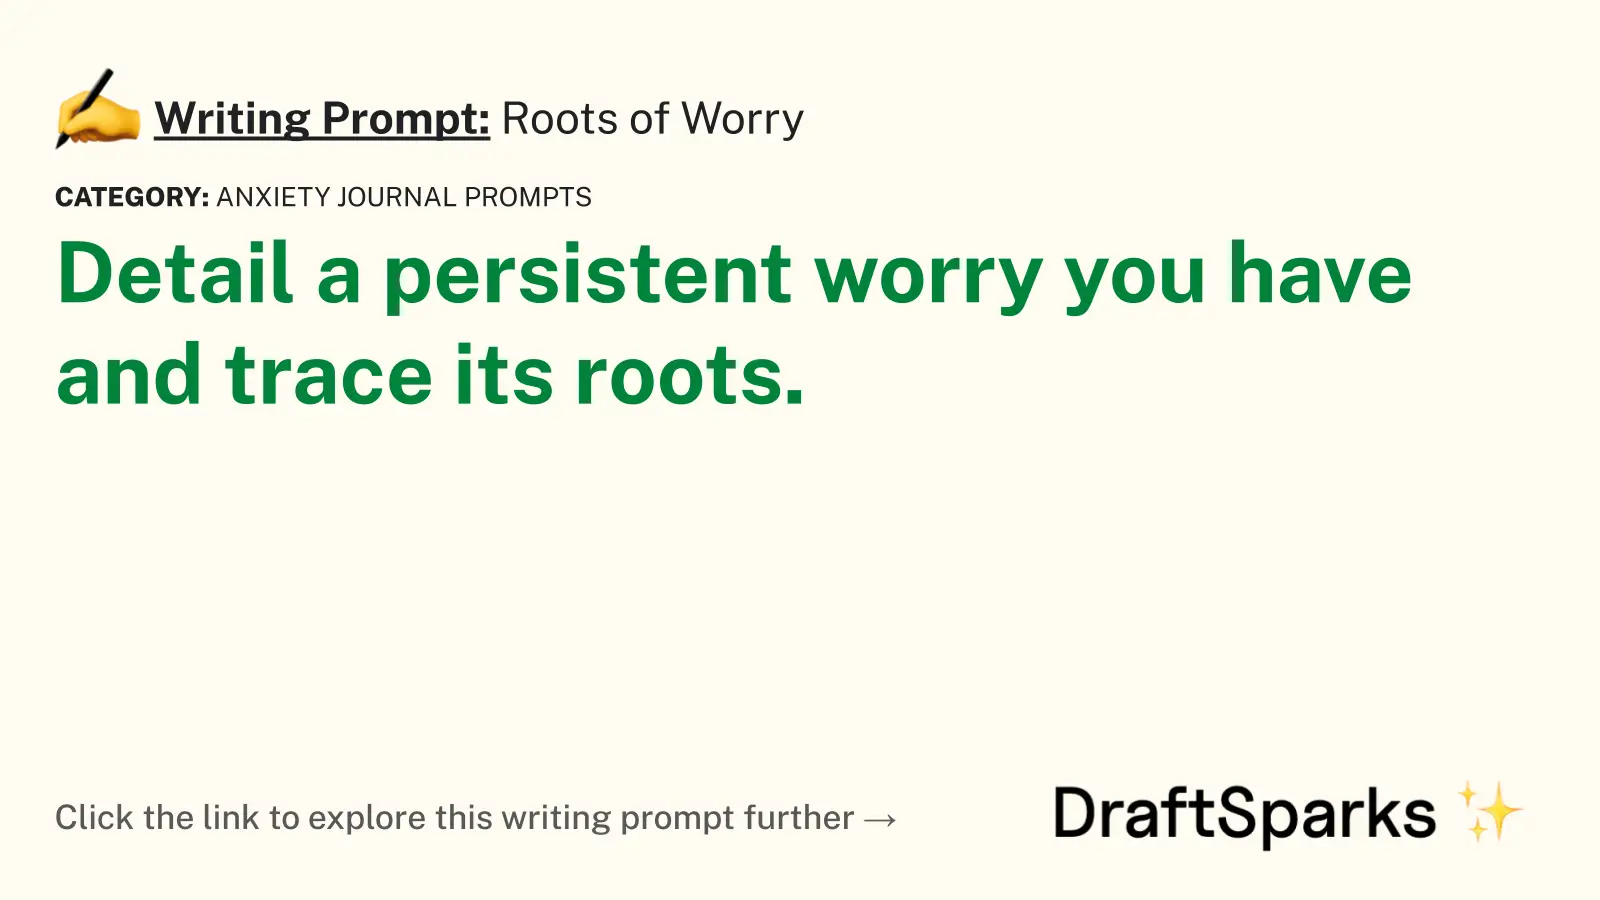 Roots of Worry